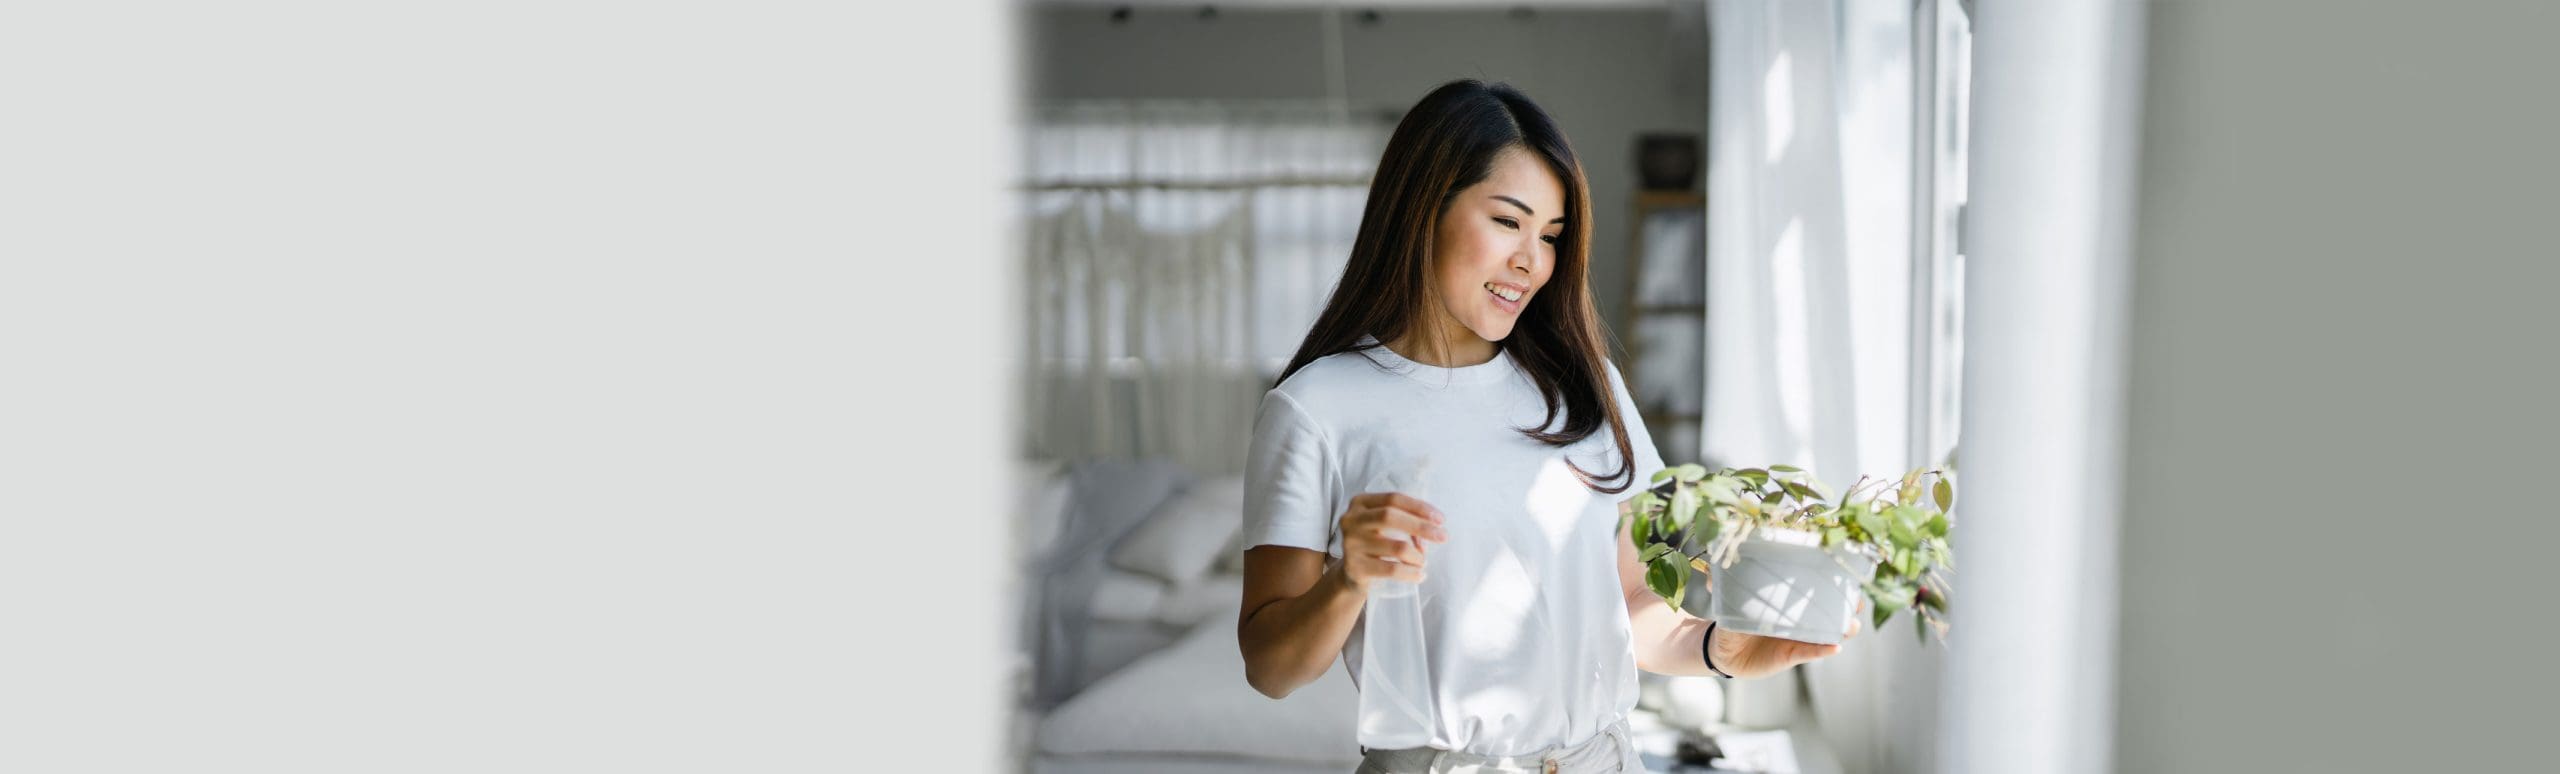 Woman looking at healthy plant by the kitchen window